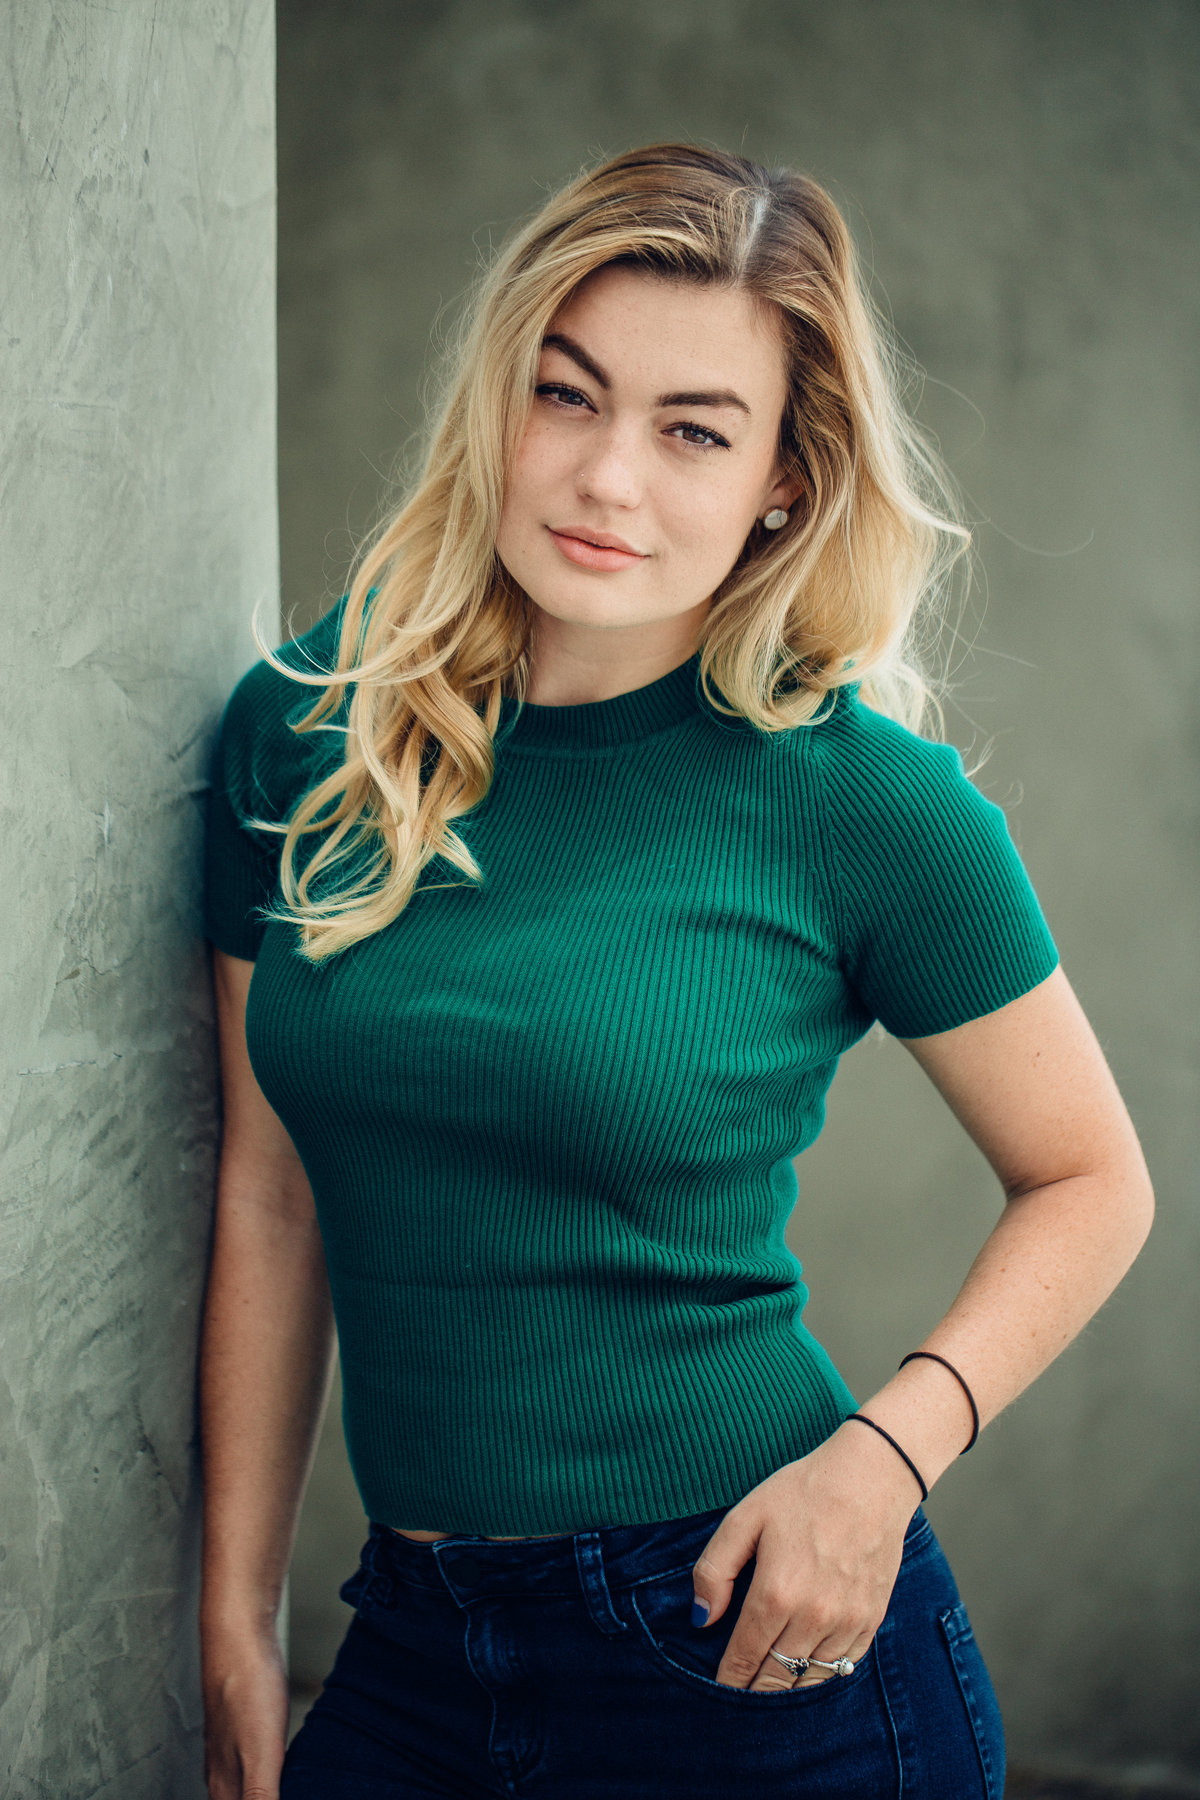 Headshot Photograph Of Young Woman In Dark Green Shirt Los Angeles